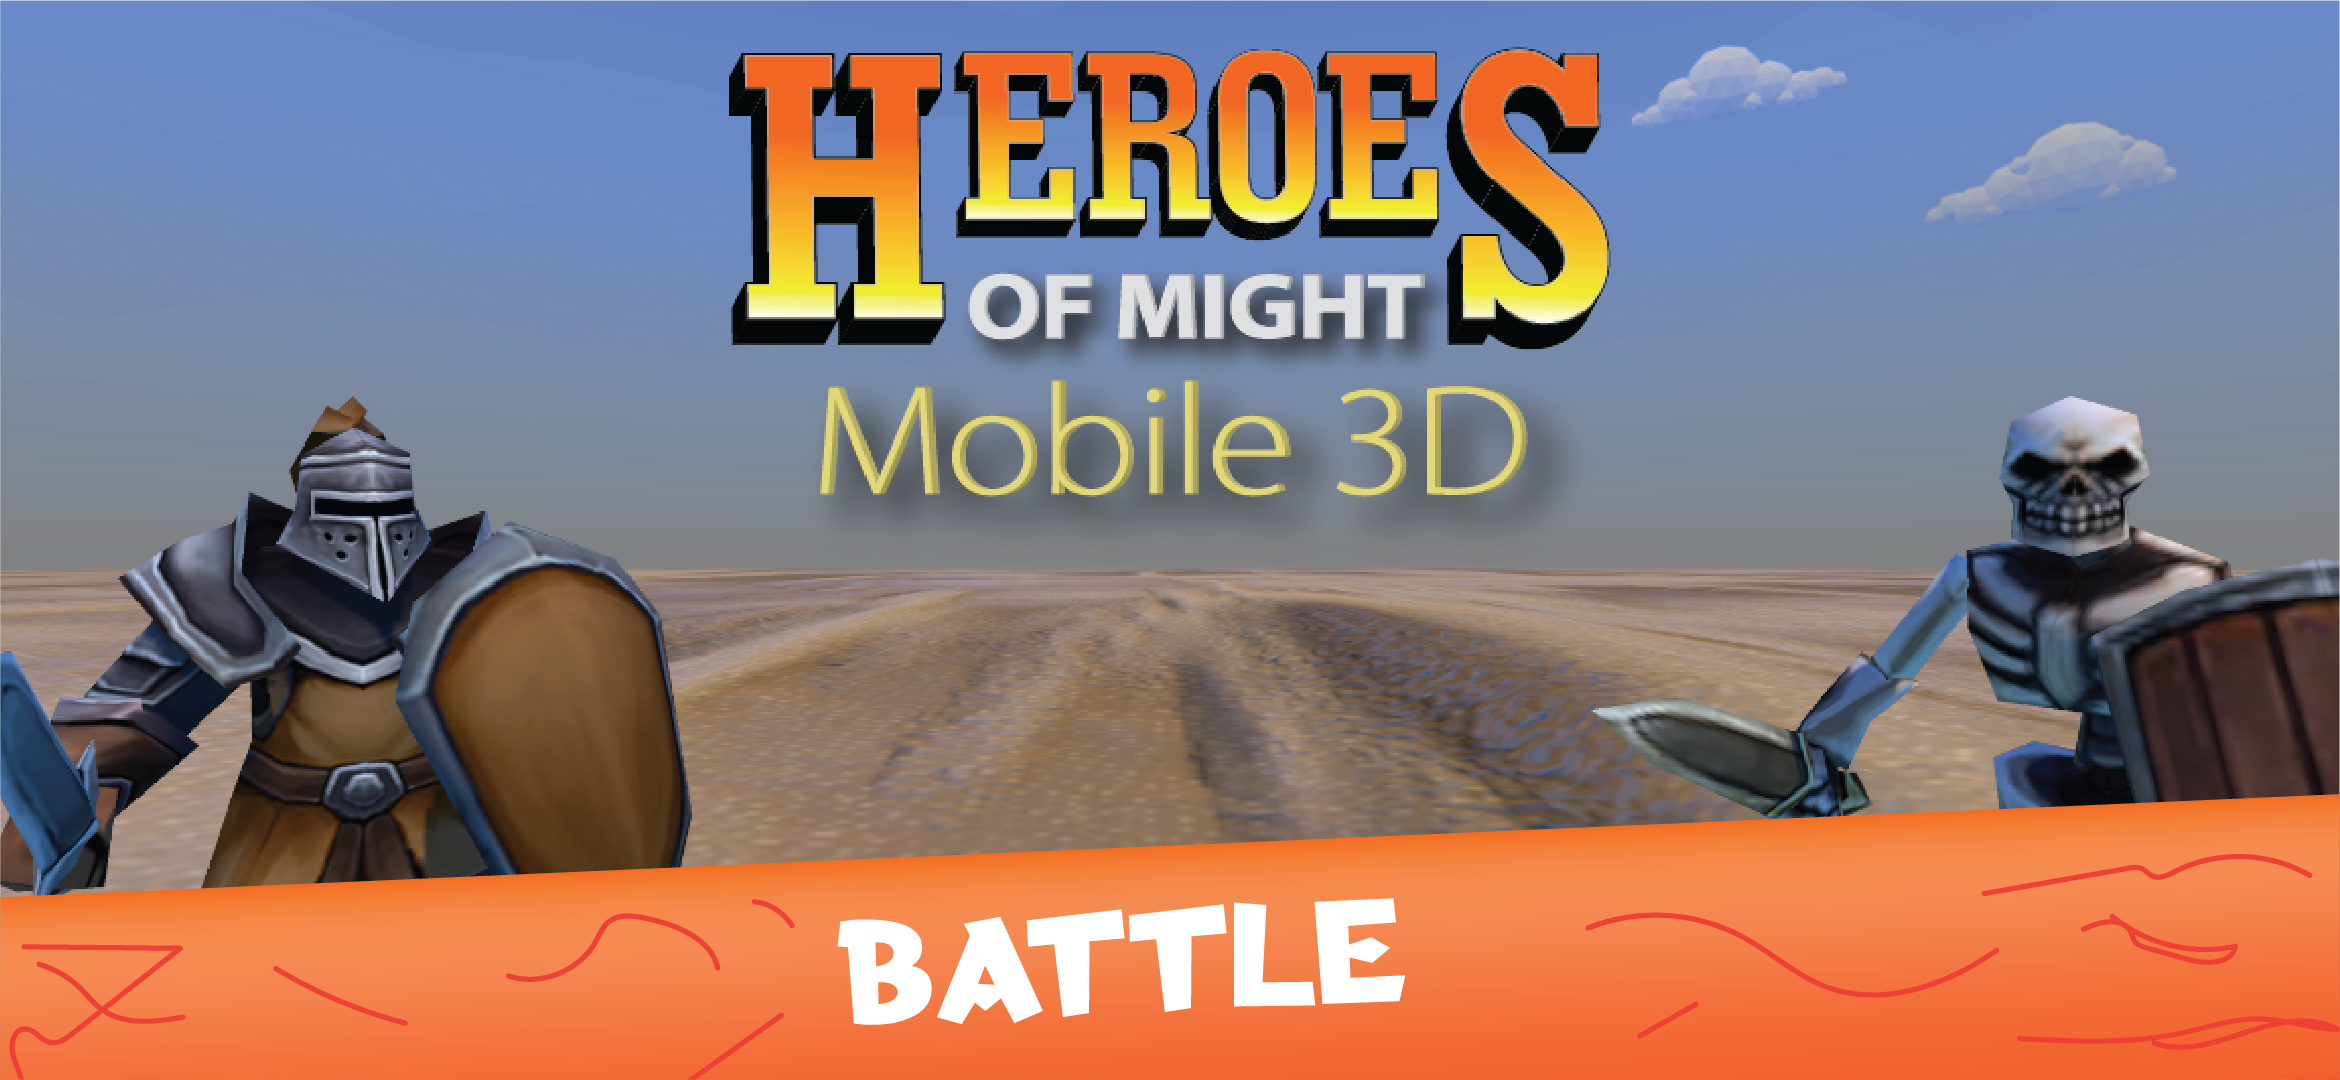 Heroes of Might Mobile 3D ภาพหน้าจอเกม